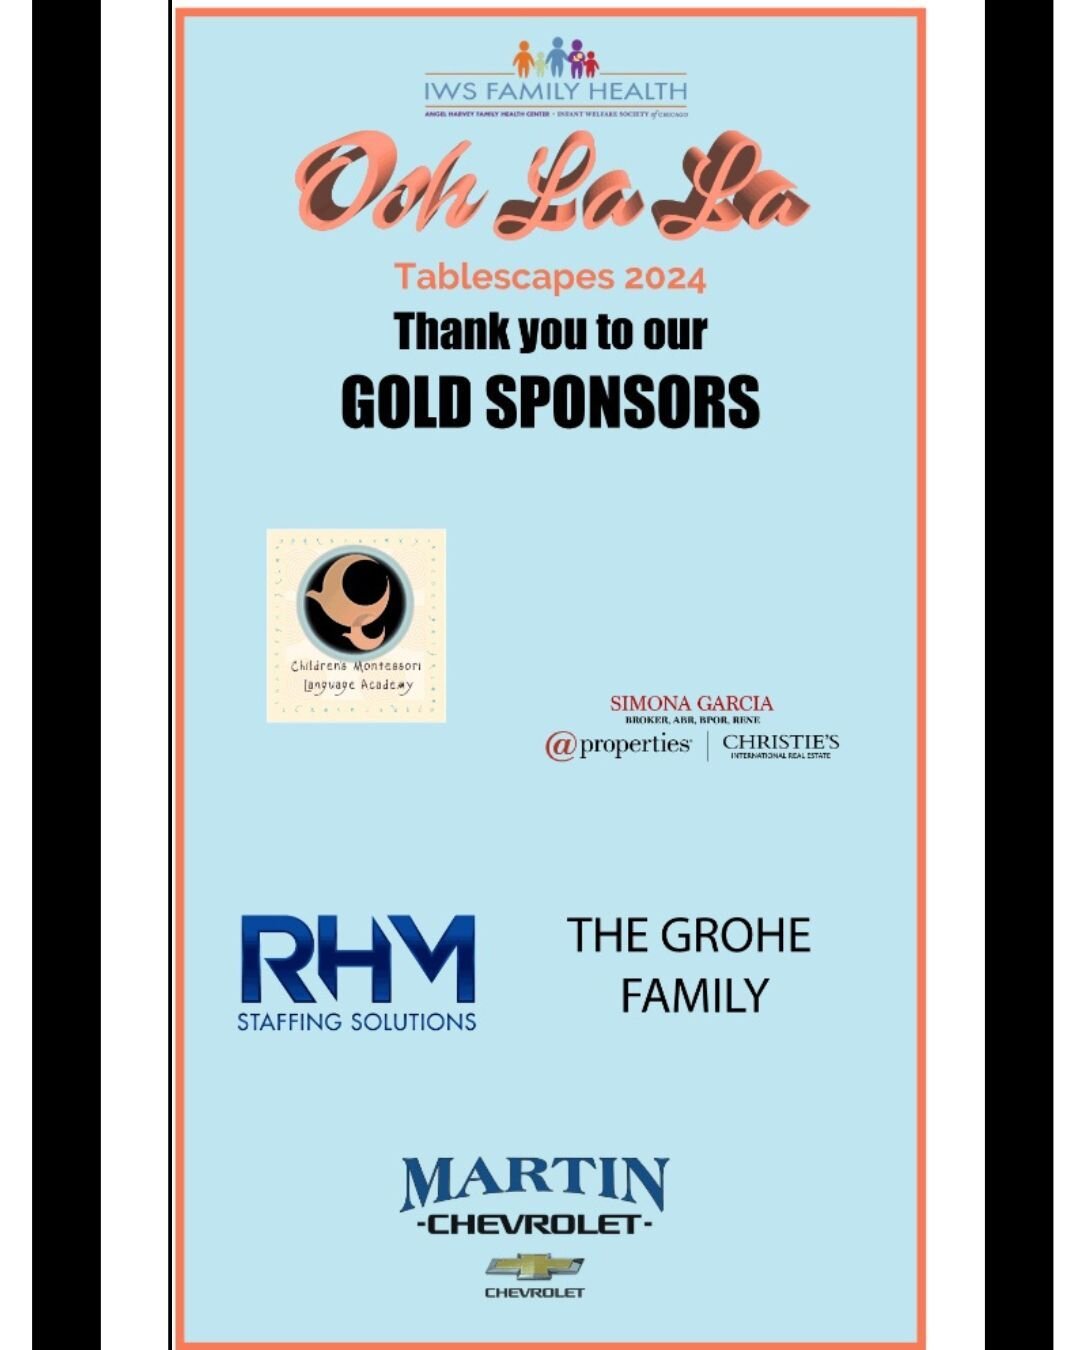 Thank you Gold Sponsors for your support of Tablescapes.

All proceeds support the Angel Harvey Family Health Center of Chicago.